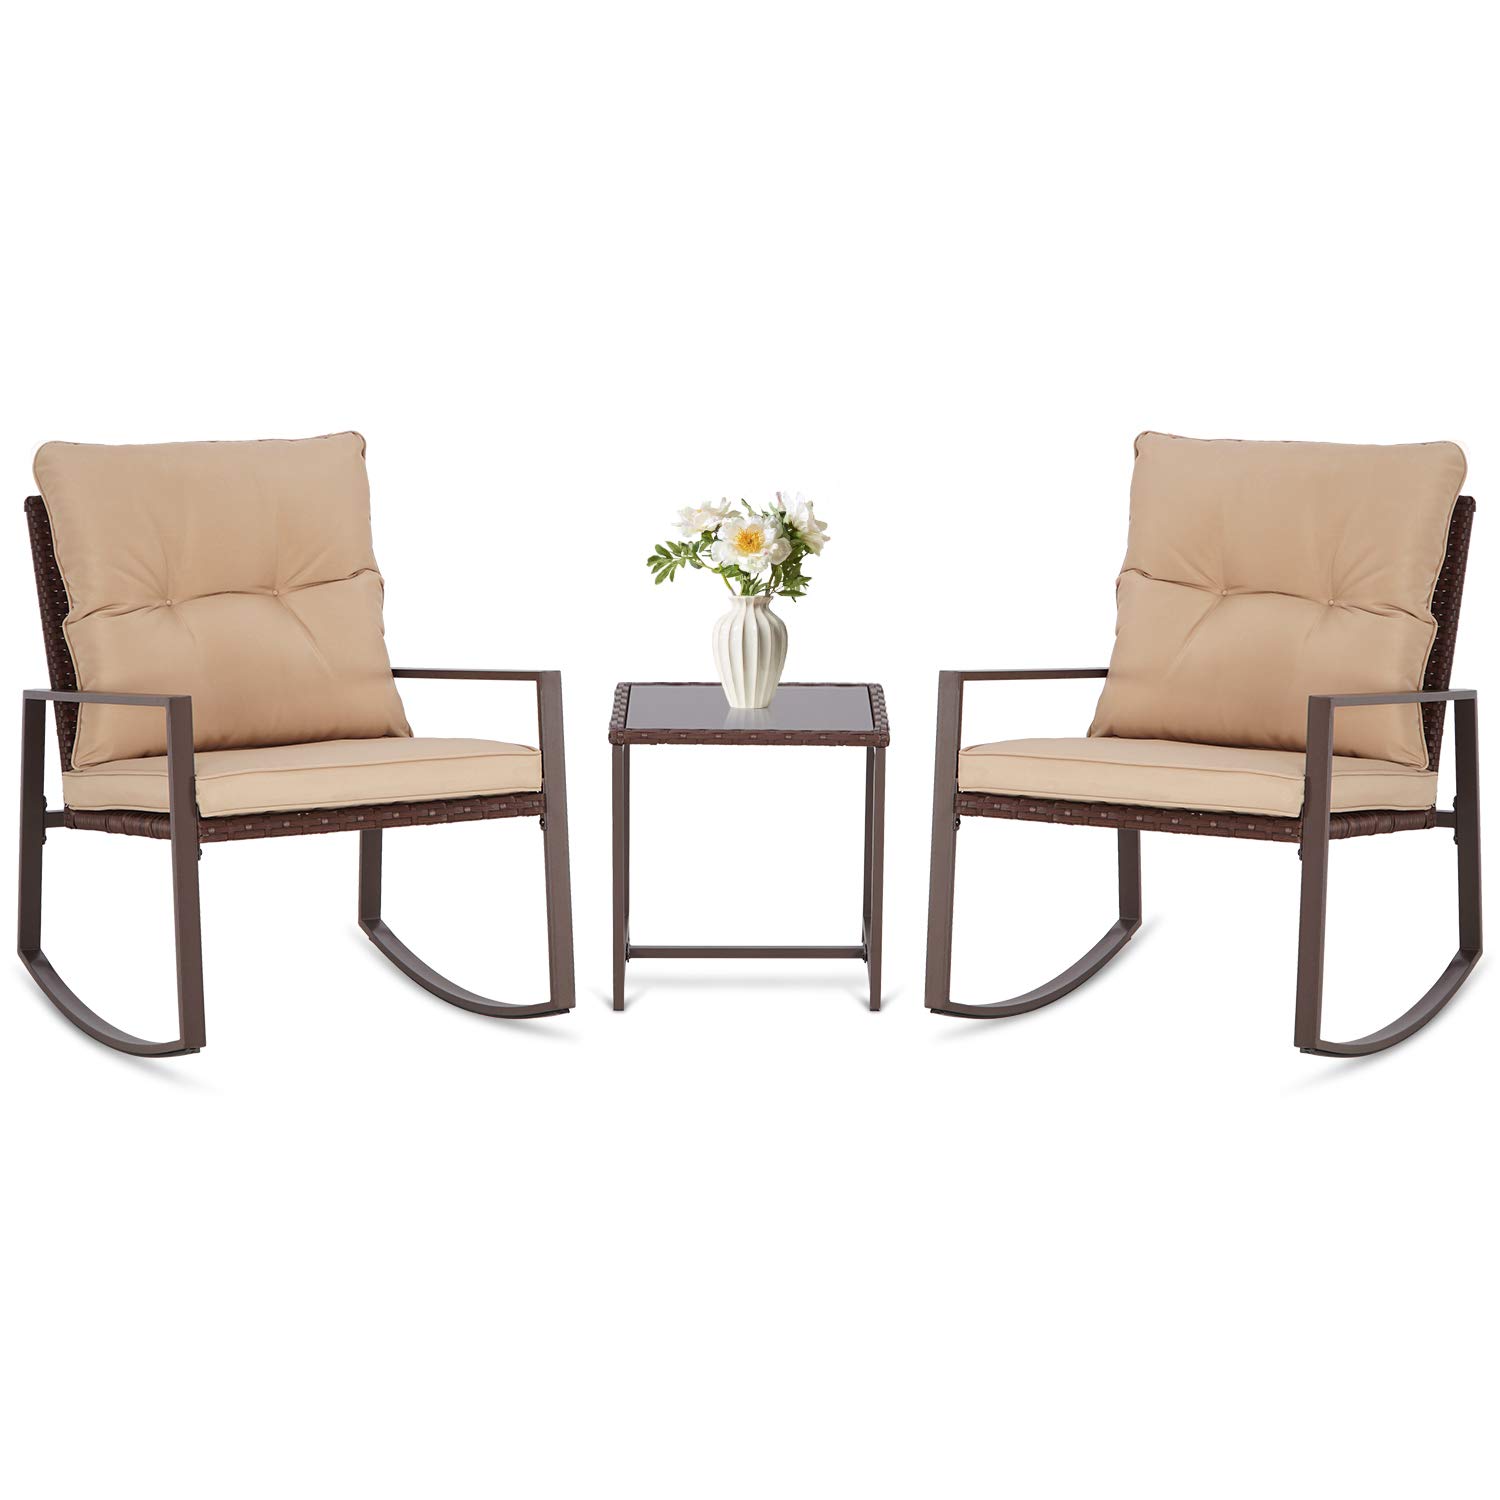 SUNCROWN 3 Piece Outdoor Bistro Set Patio Rocking Chair Brown Wicker Chairs with Brown Cushion and Glass-Top Table - image 1 of 7